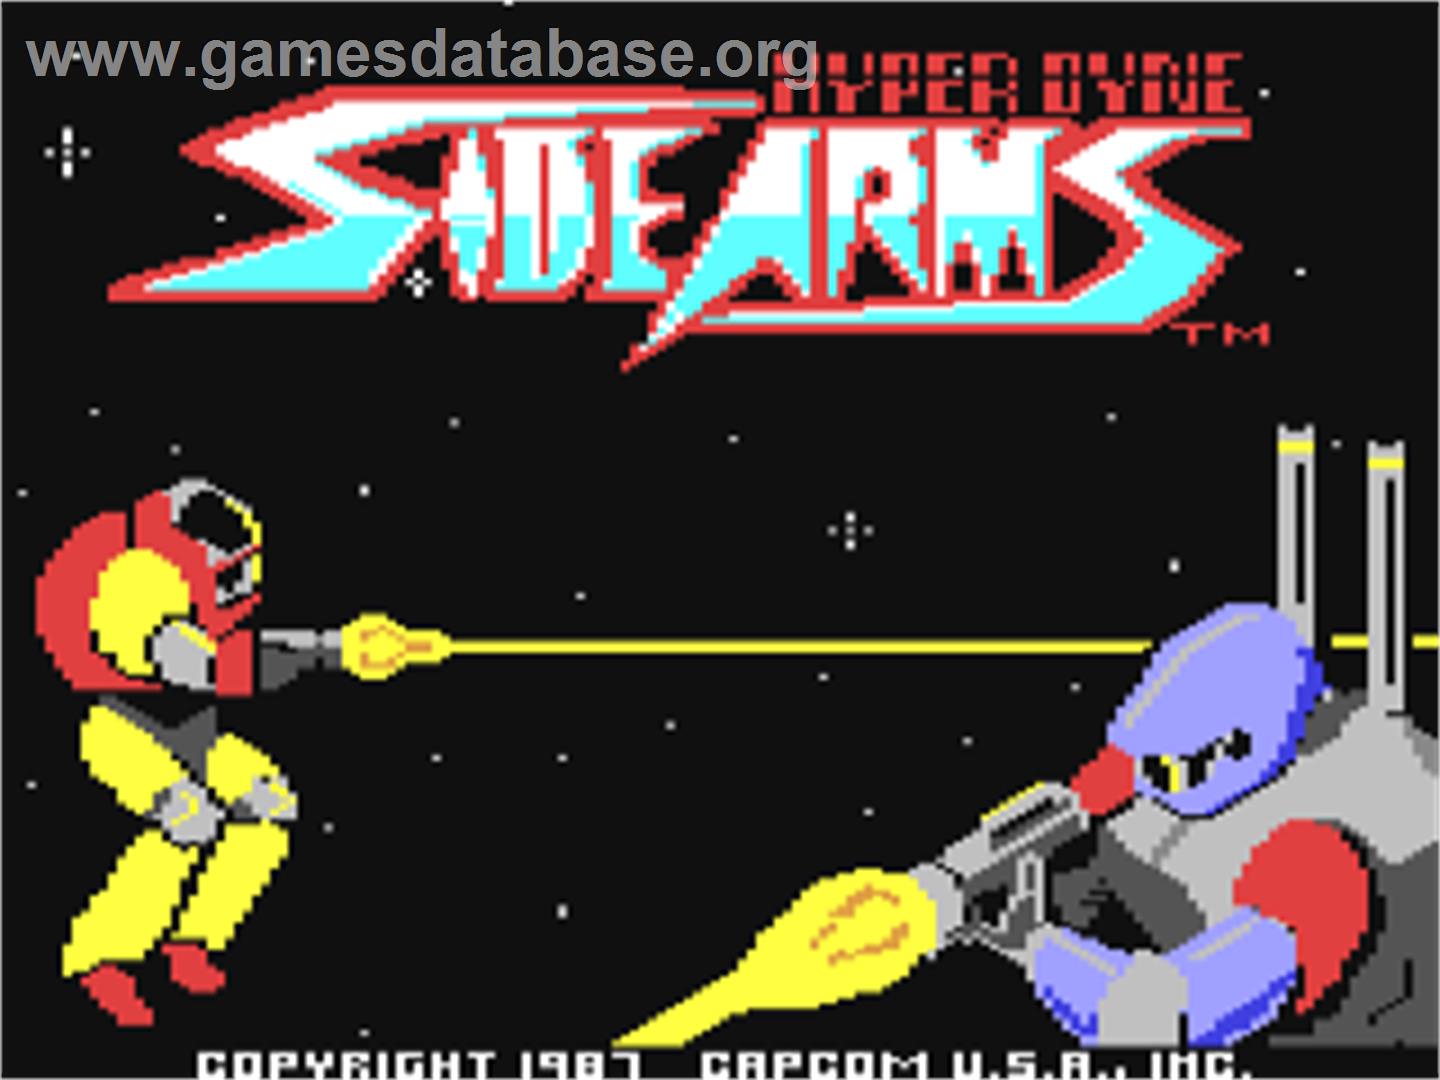 Side Arms Hyper Dyne - Commodore 64 - Artwork - Title Screen